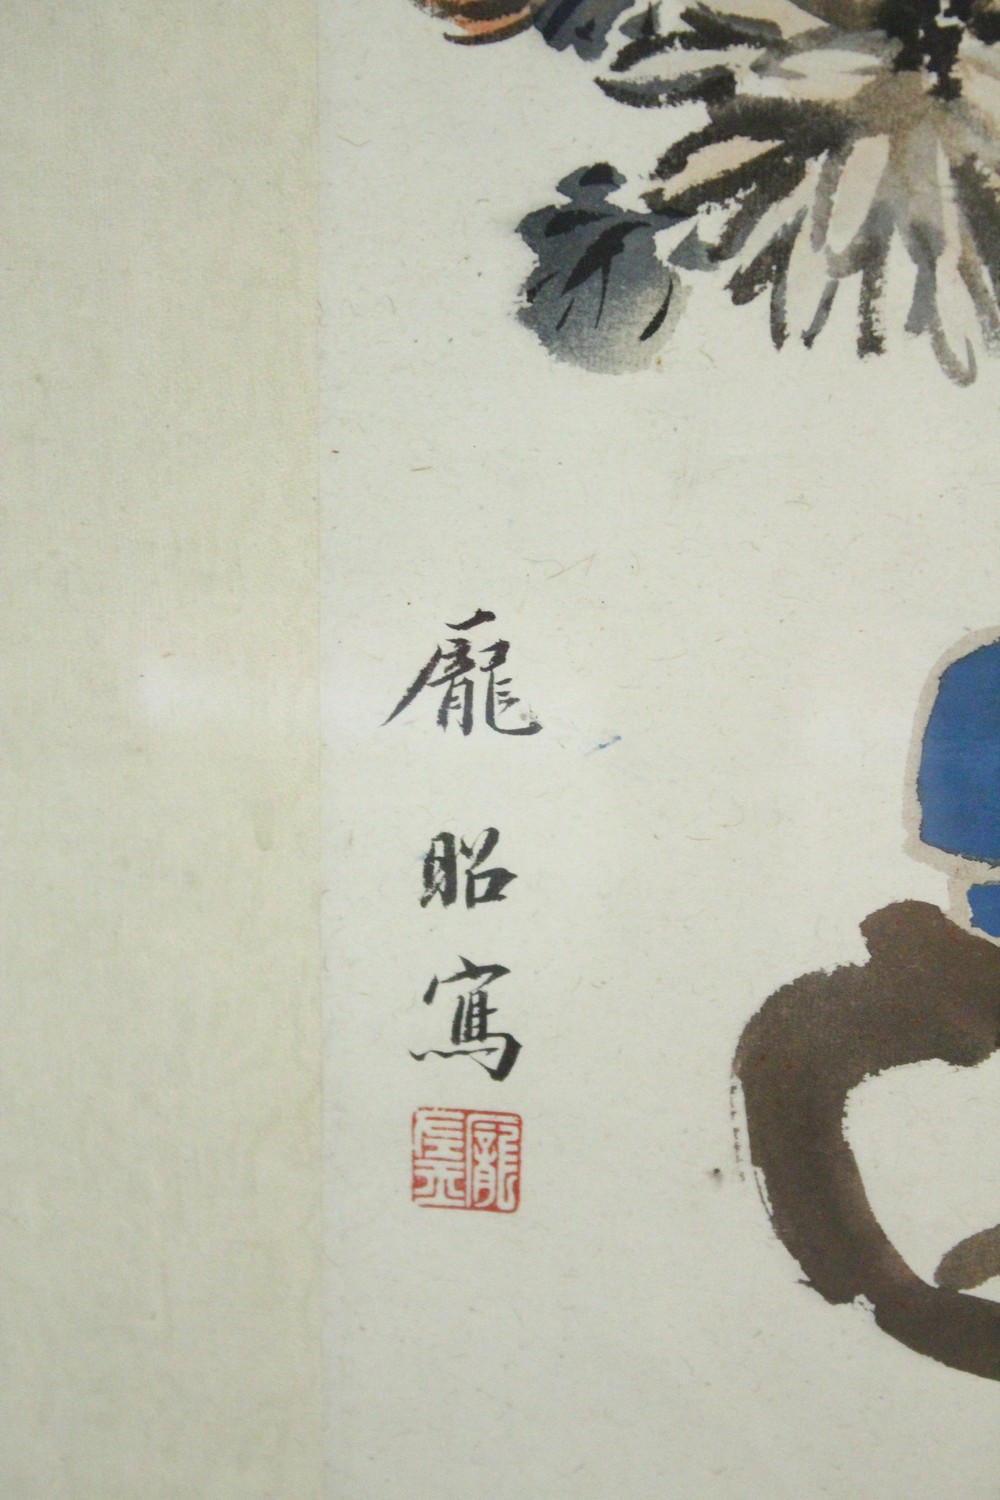 A GOOD 20TH CENTURY CHINESE PAINTING ON PAPER HANGING SCROLL BY PANG ZHAO 1915 - 1967, the - Image 3 of 4